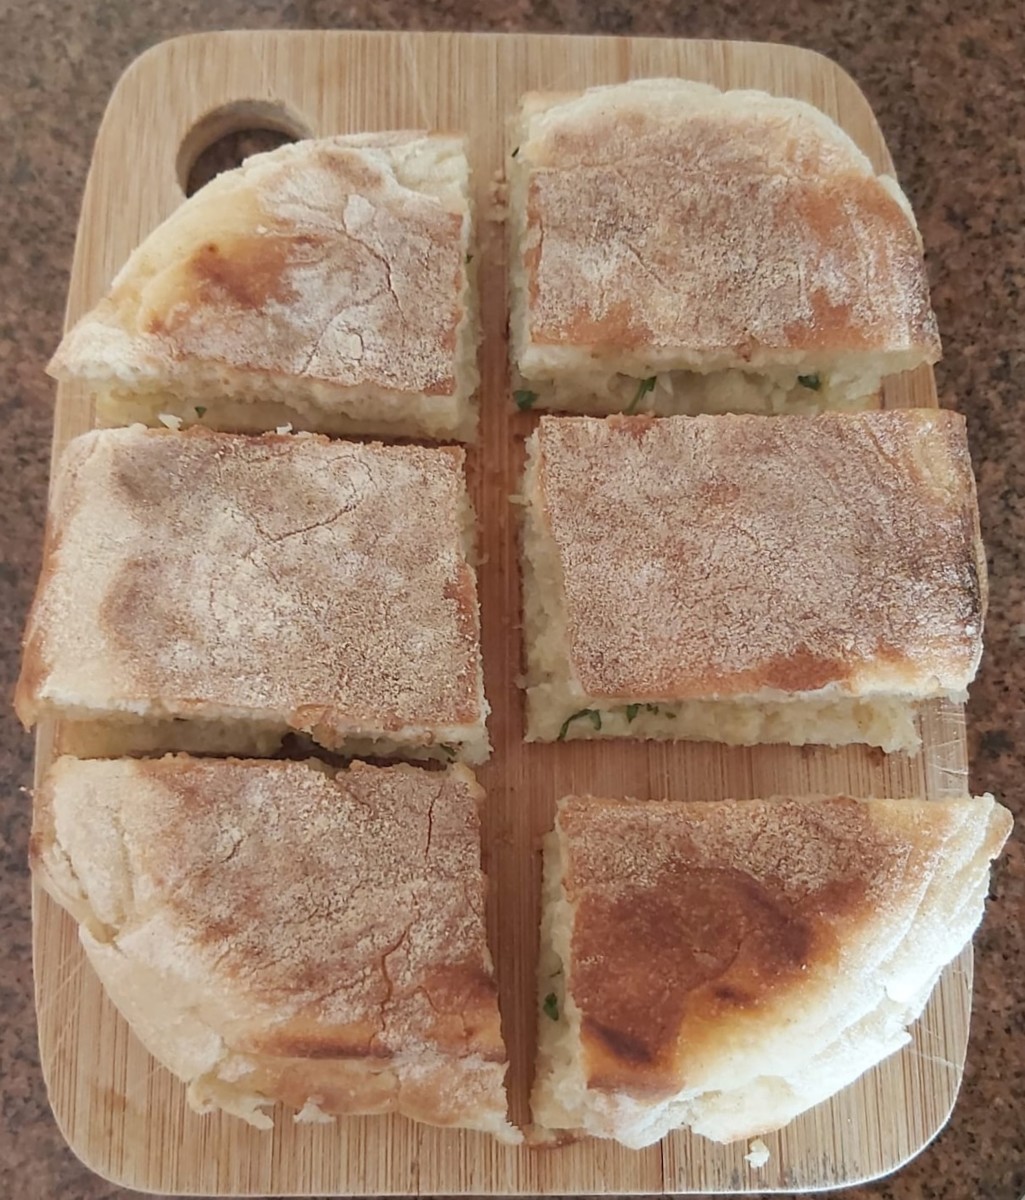 I like to serve this dish with bolo de caco, a traditional island garlic bread.